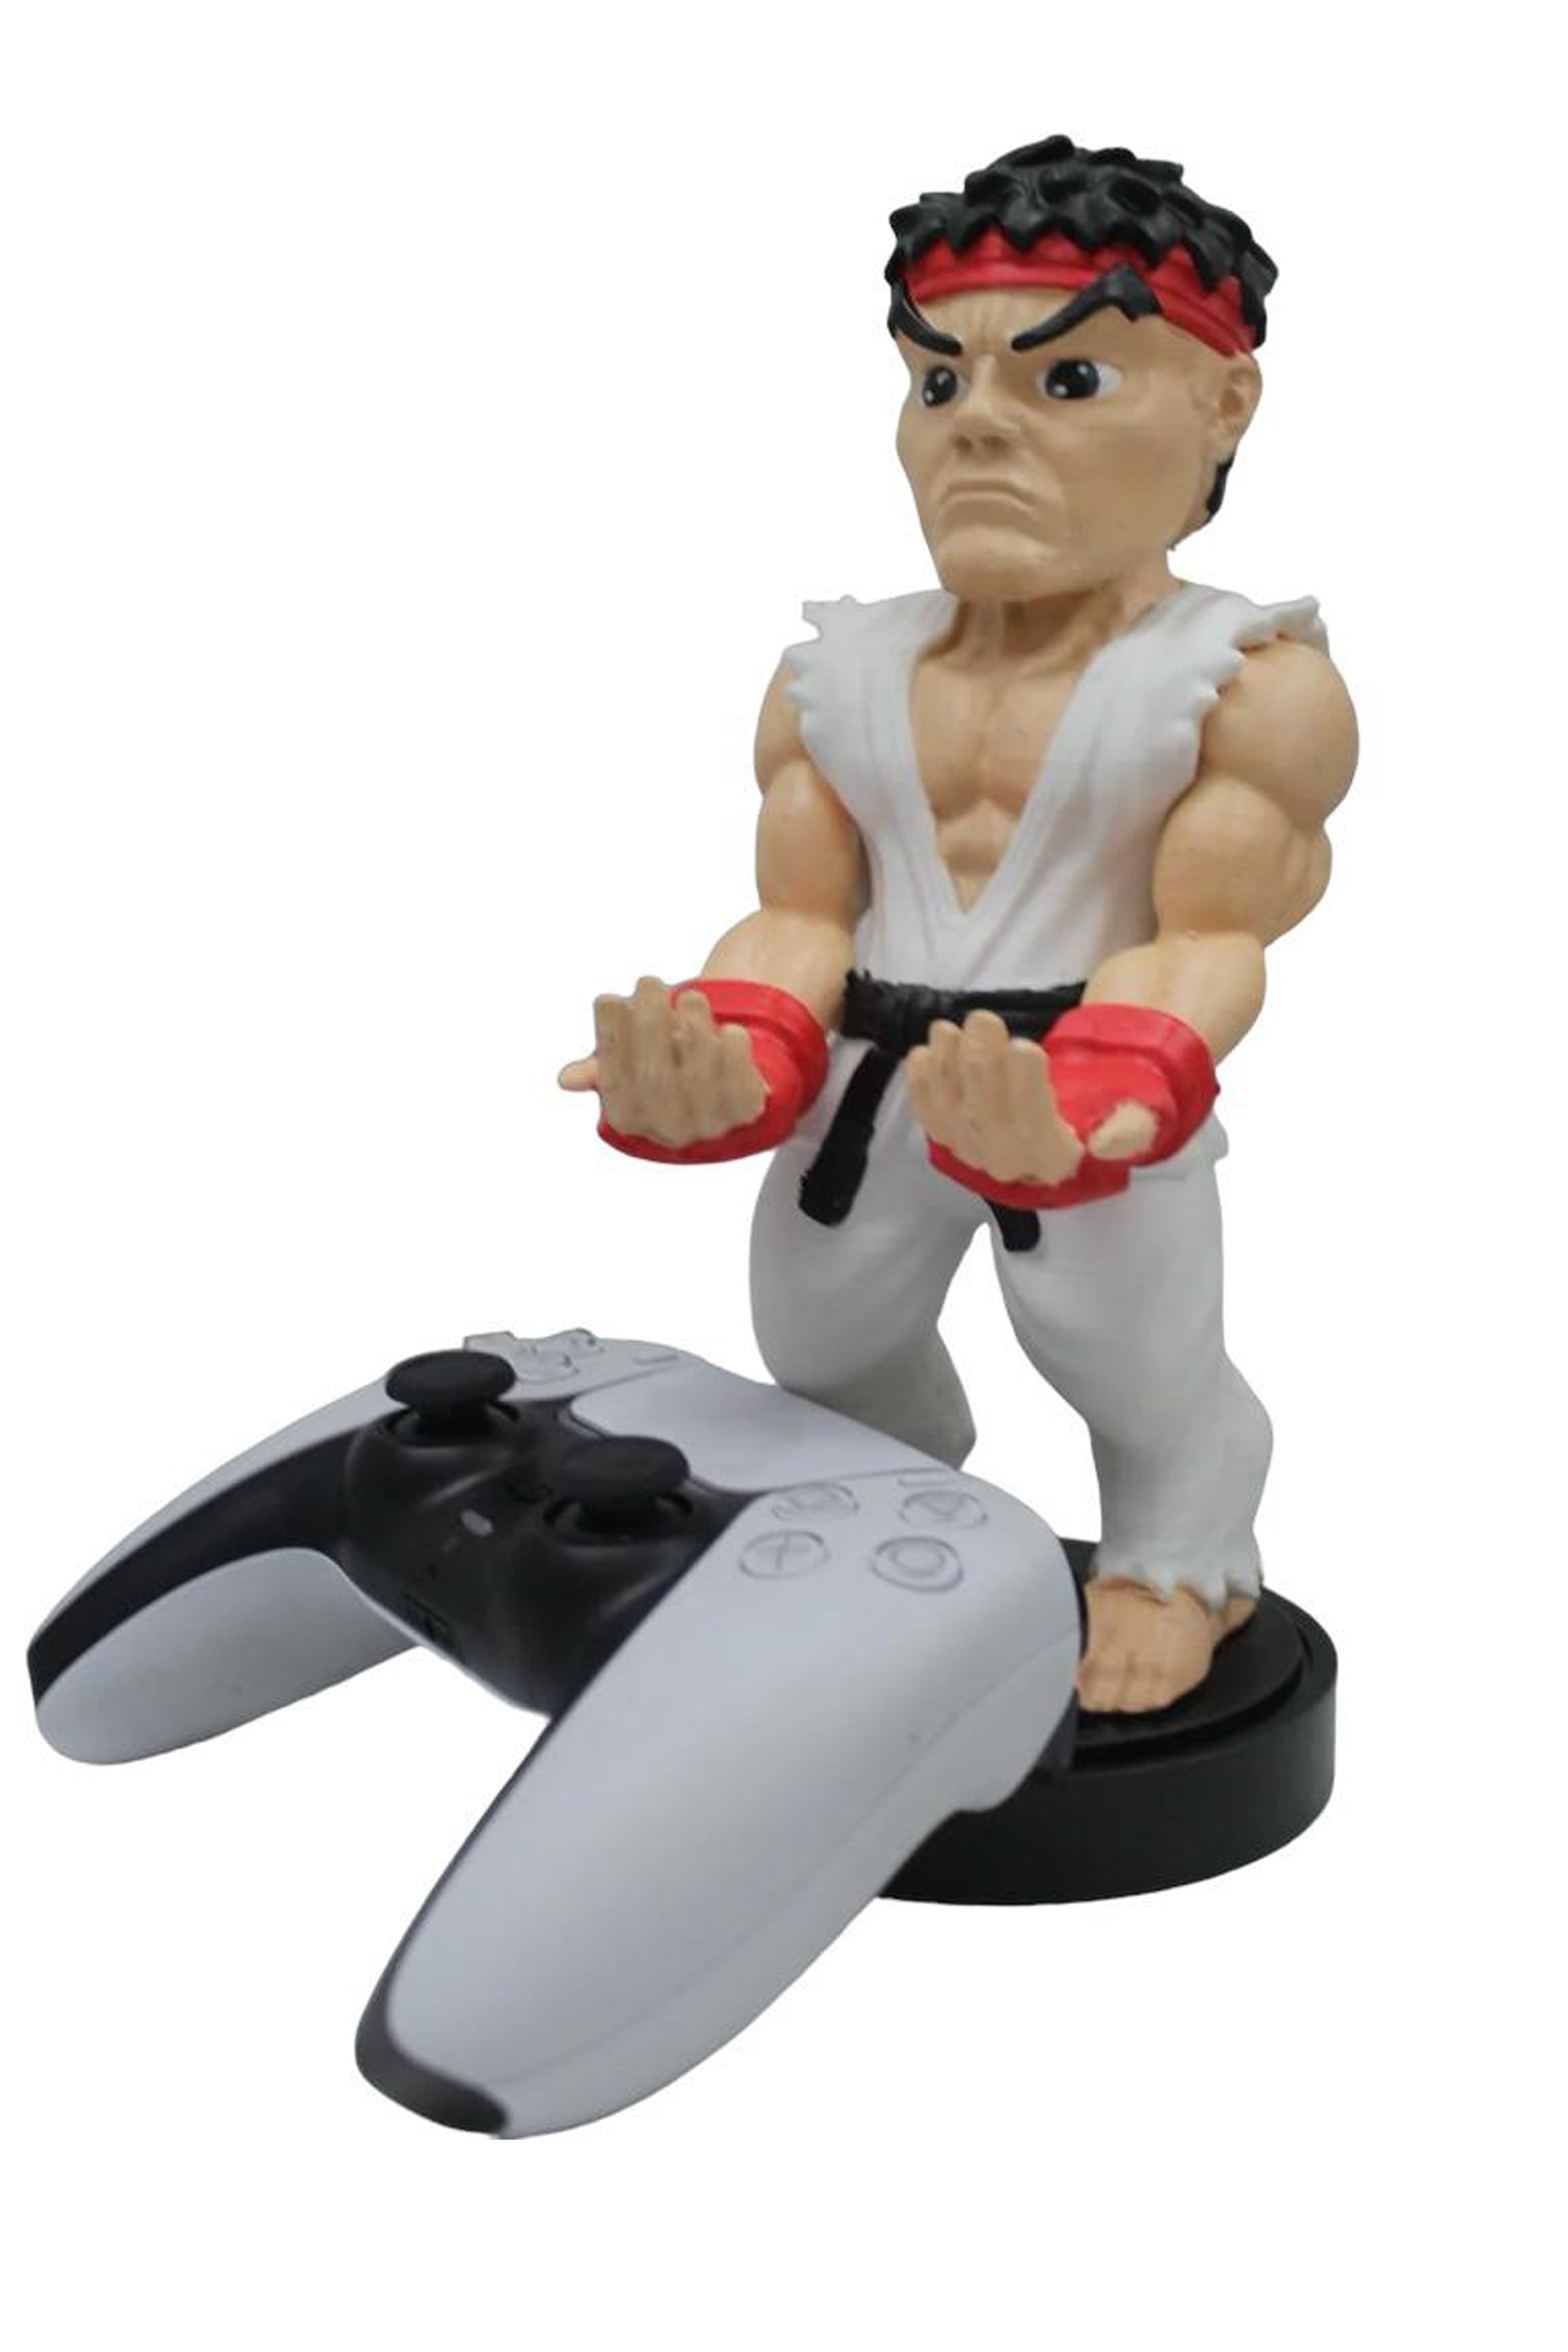 Street Fighter RYU Controls arm holder stand